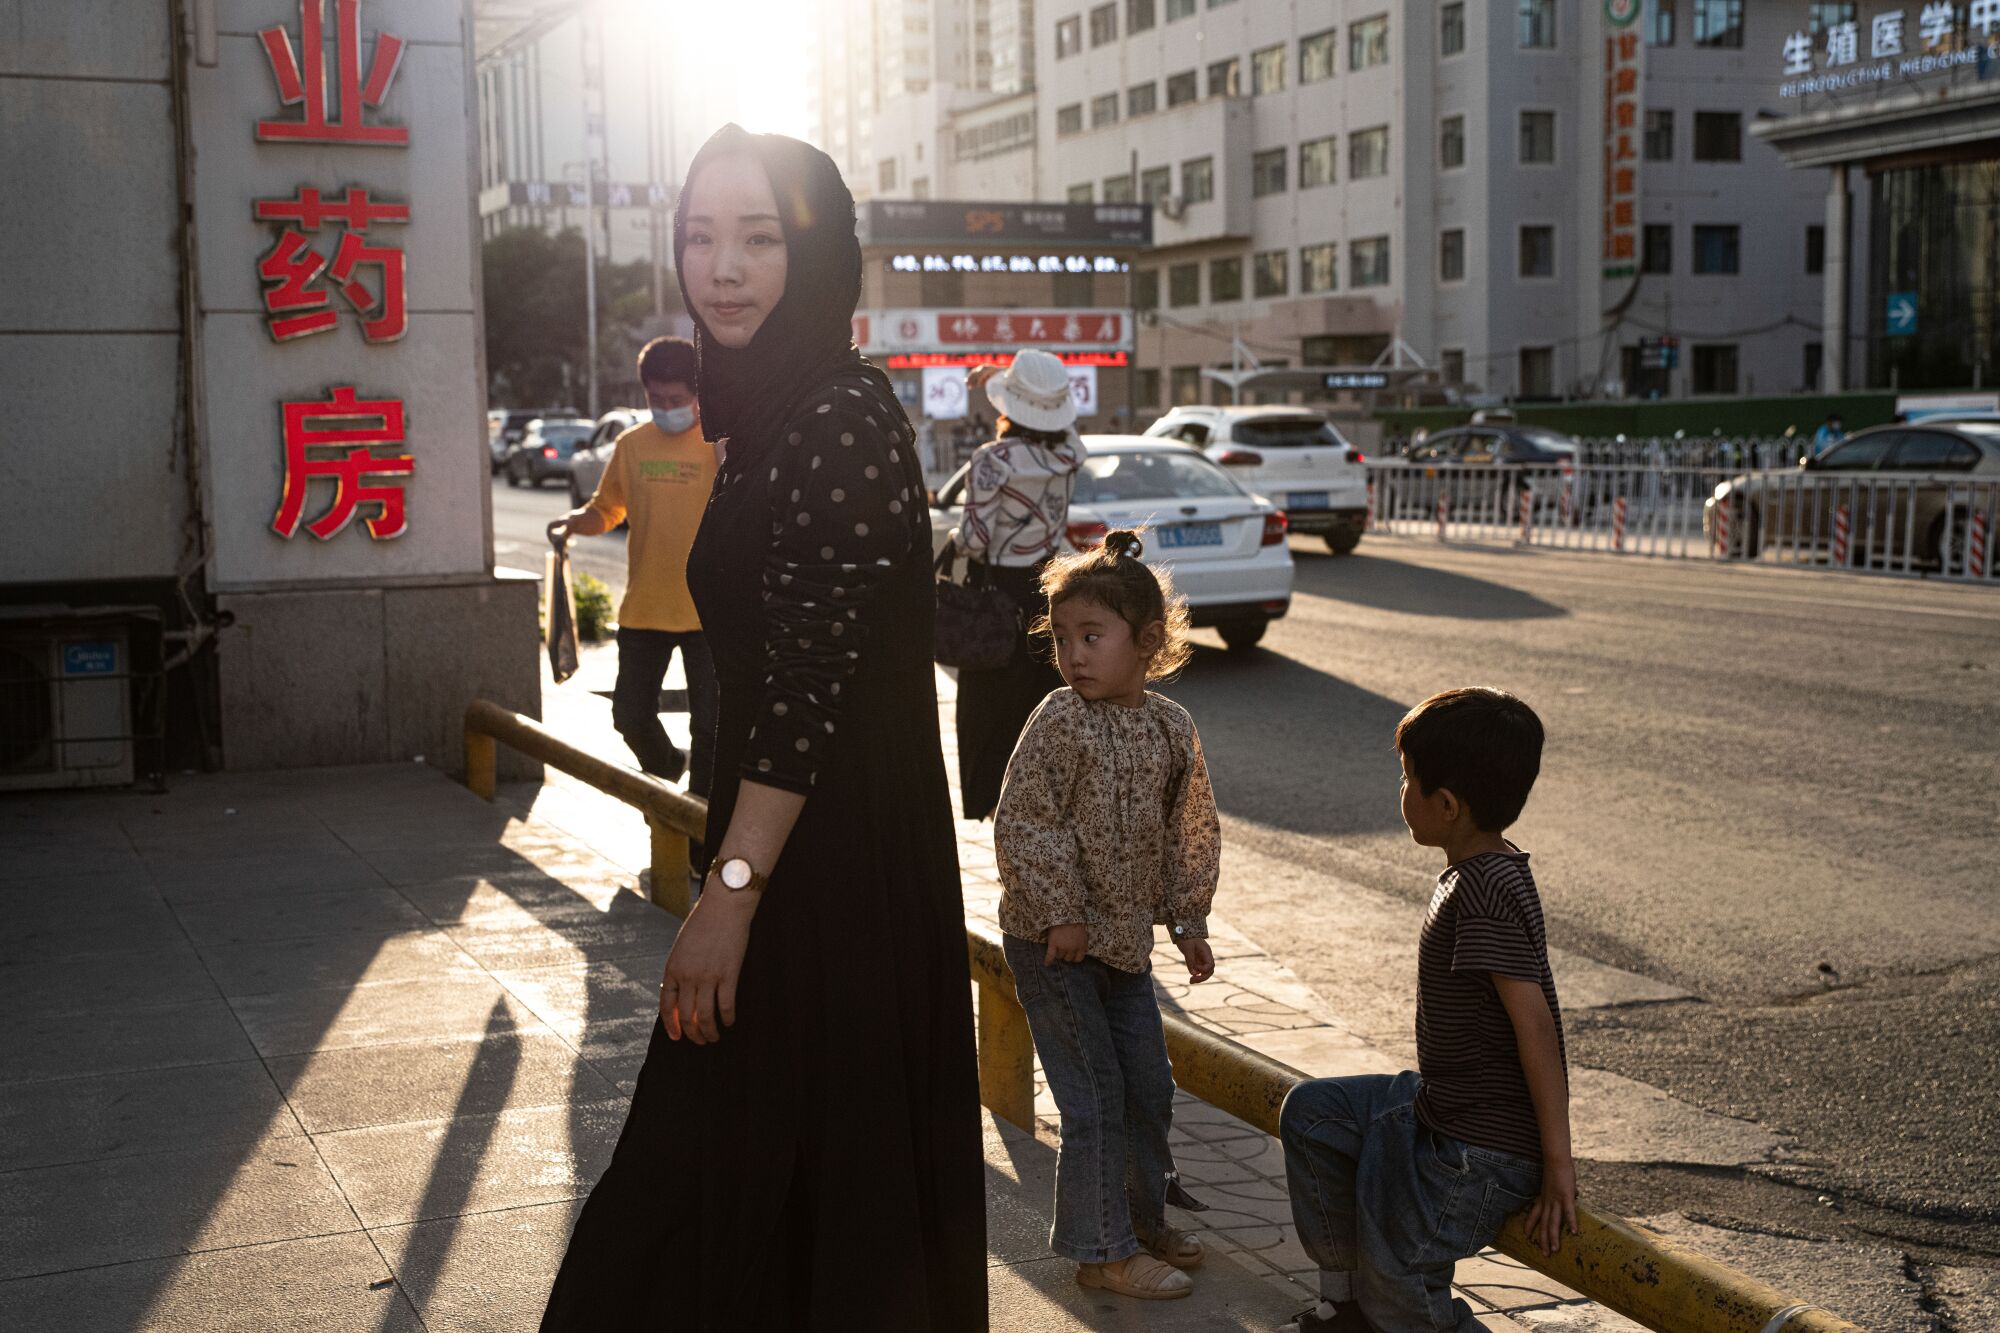 A woman in a dark head scarf and dark clothing stands near two children and a building with red Chinese characters